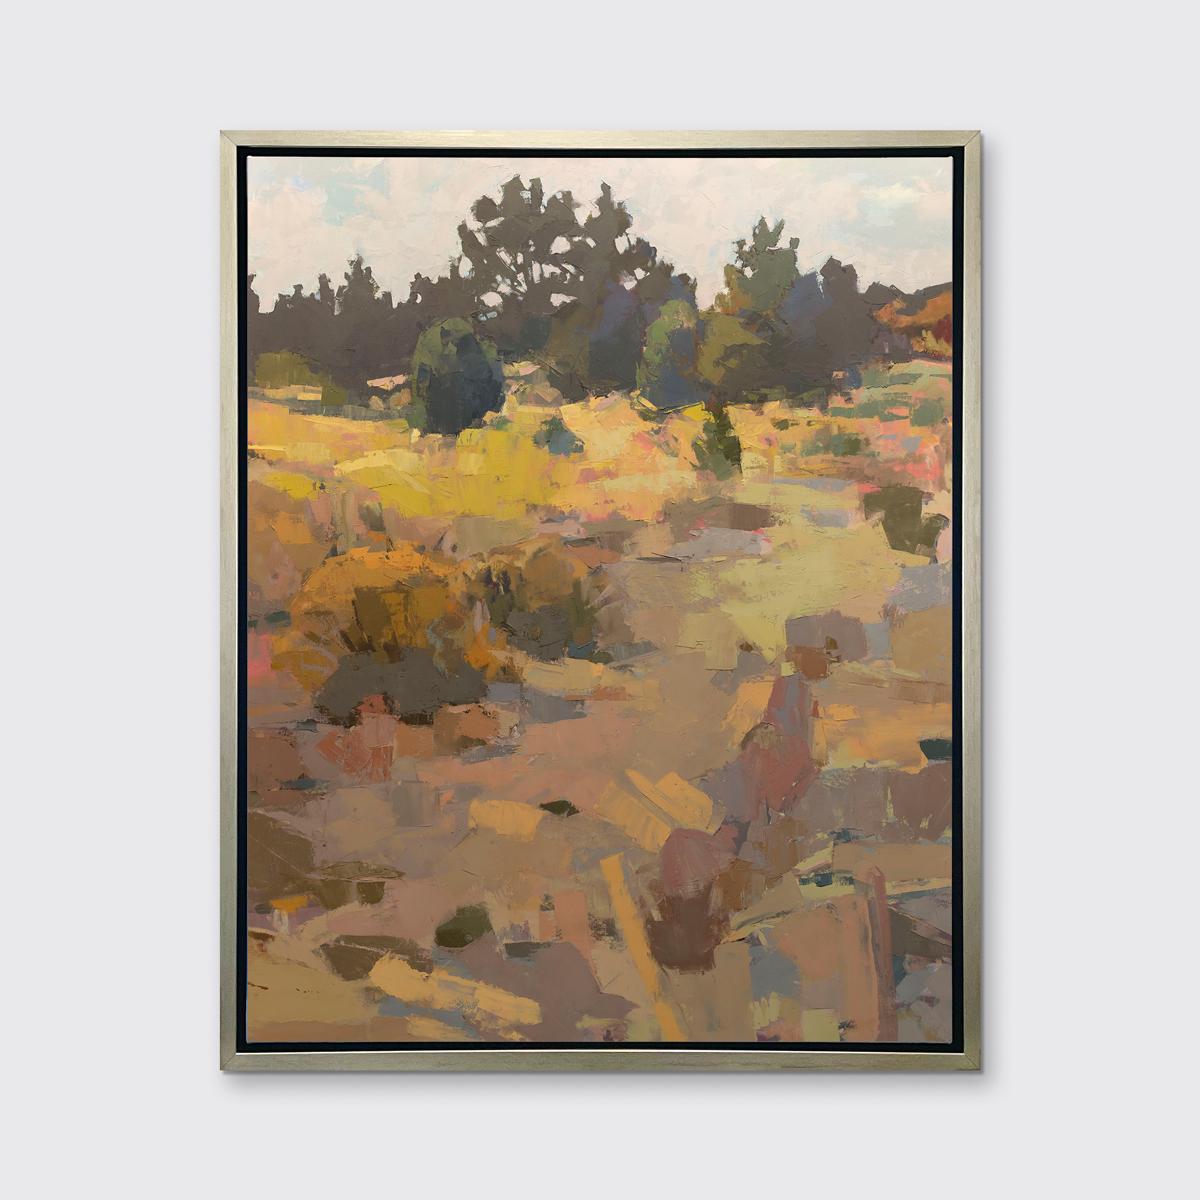 Bri Custer Landscape Print - "Short of Expectations" Framed Limited Edition Print, 50" x 40"